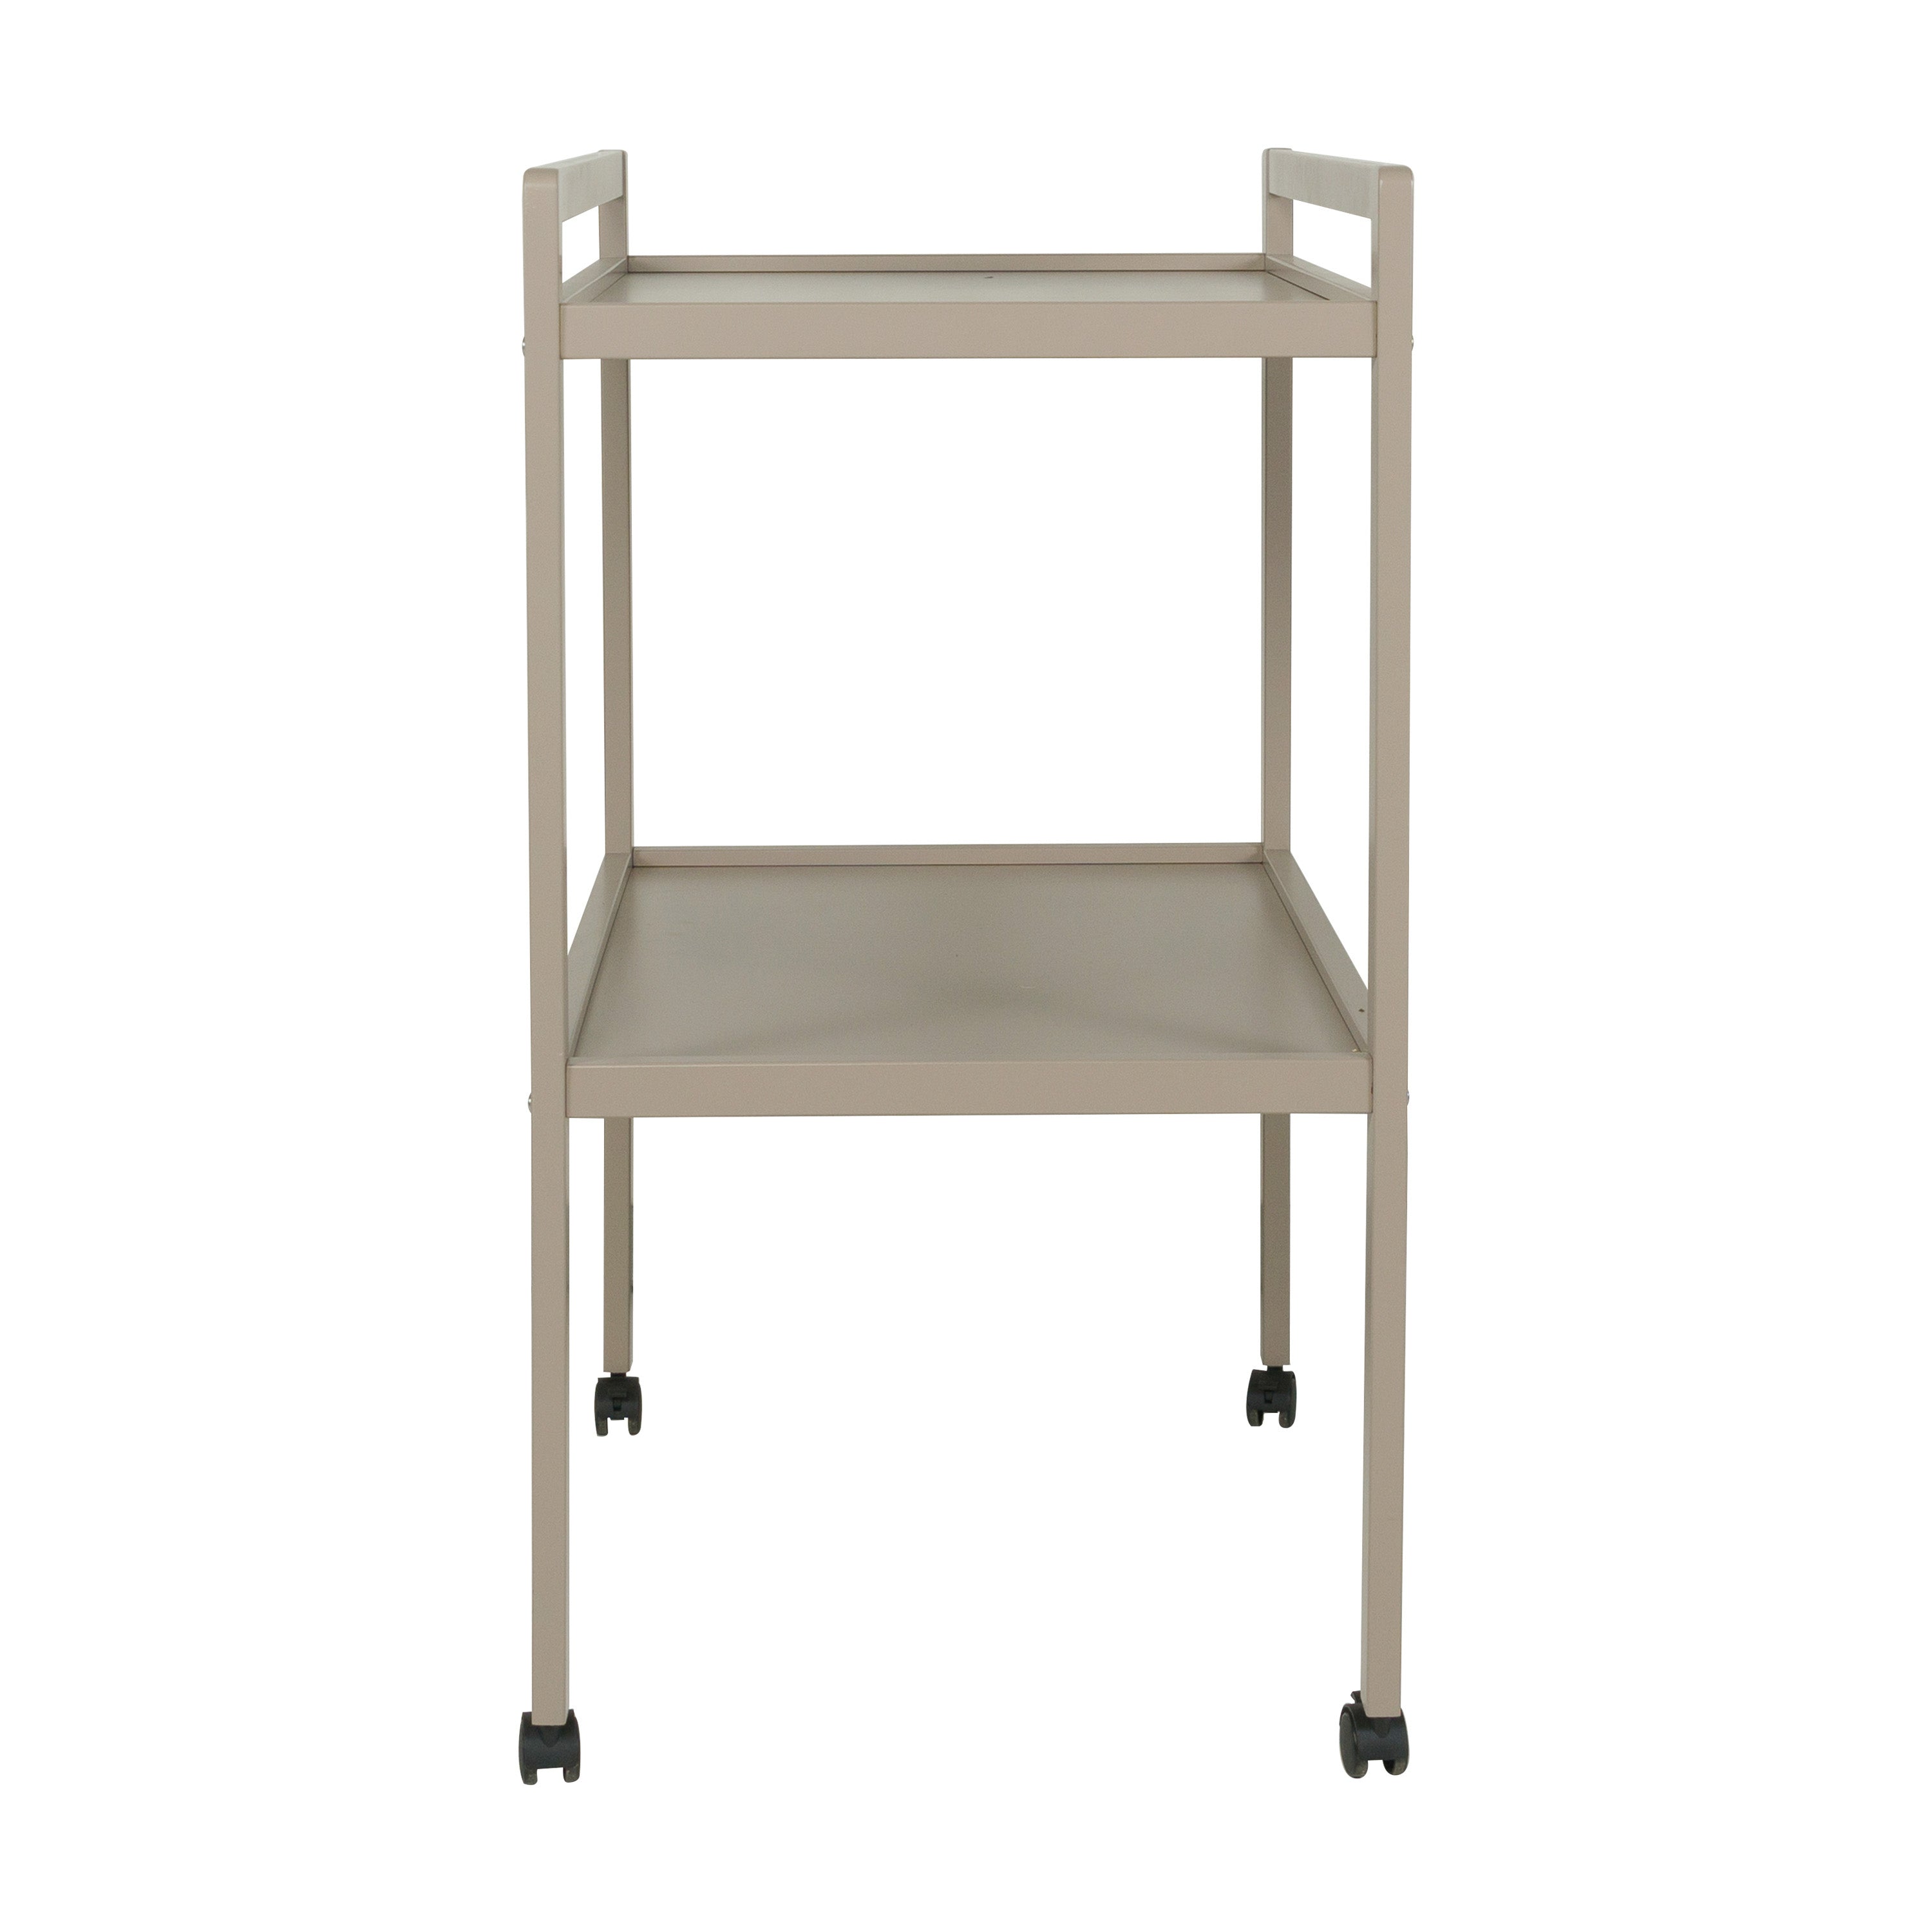 Quax Changing Table With Bath - Basic - Stone  - Hola BB